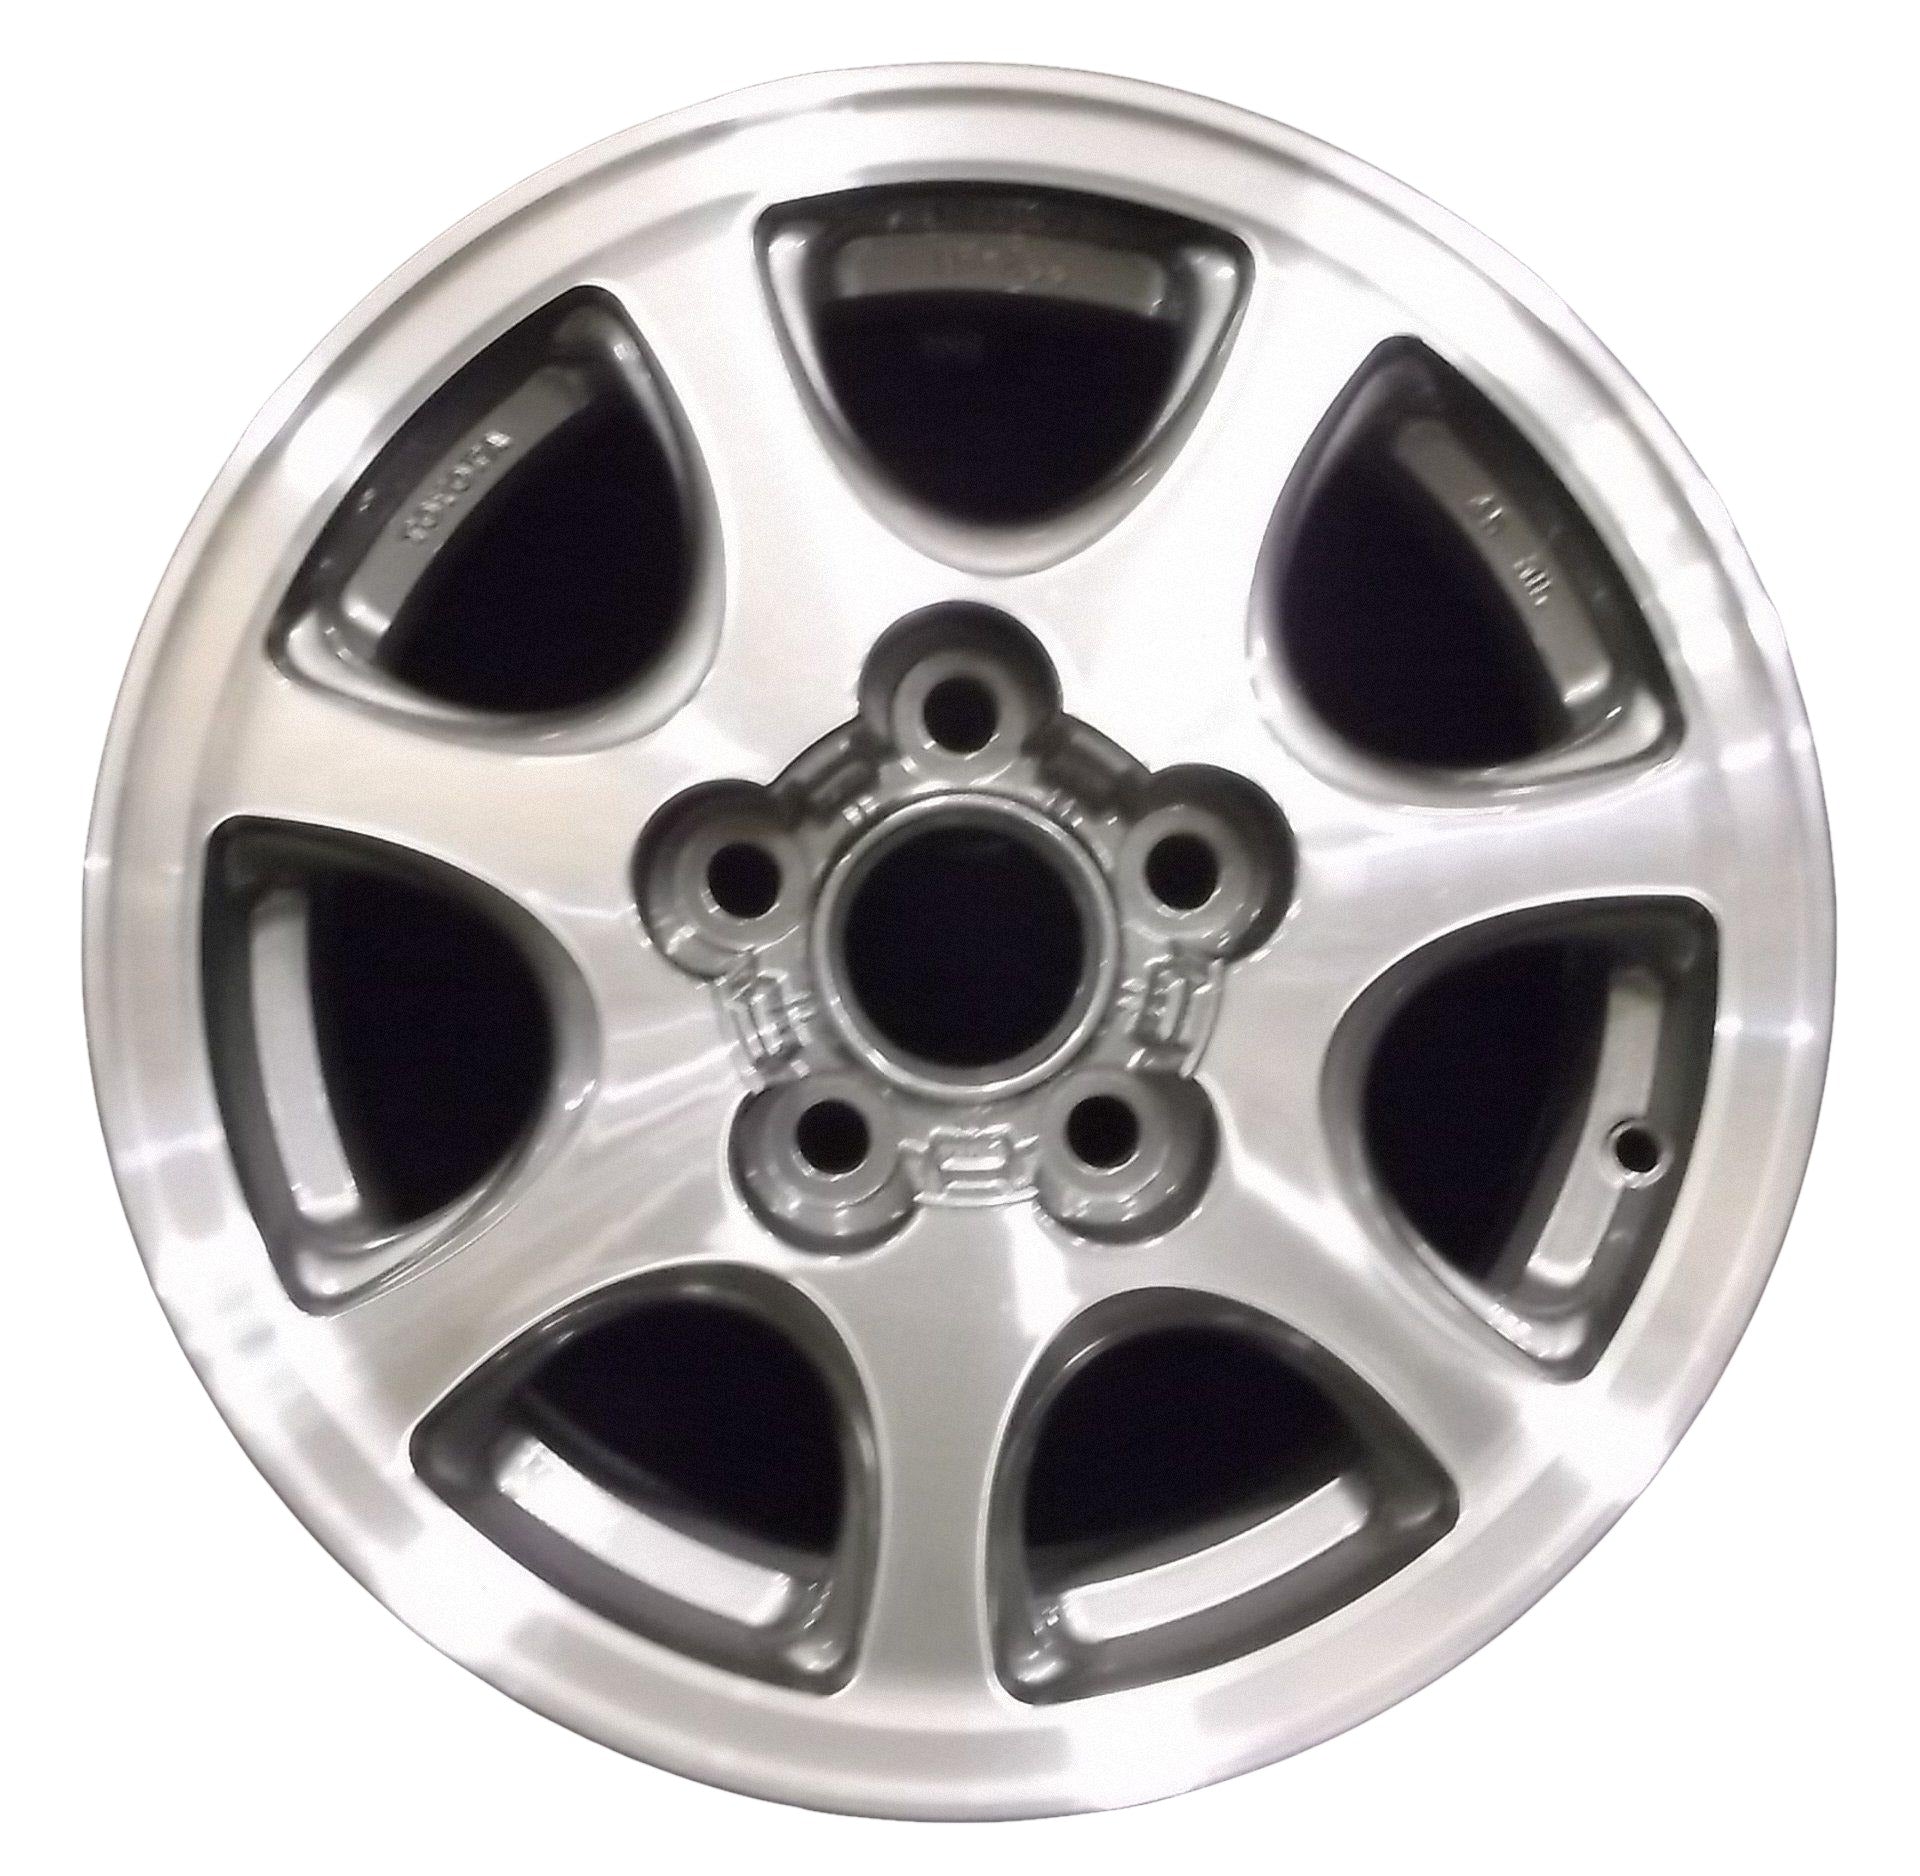 Toyota Camry  1994, 1995, 1996, 1997, 1998, 1999 Factory OEM Car Wheel Size 15x6 Alloy WAO.69326.LC04.MA